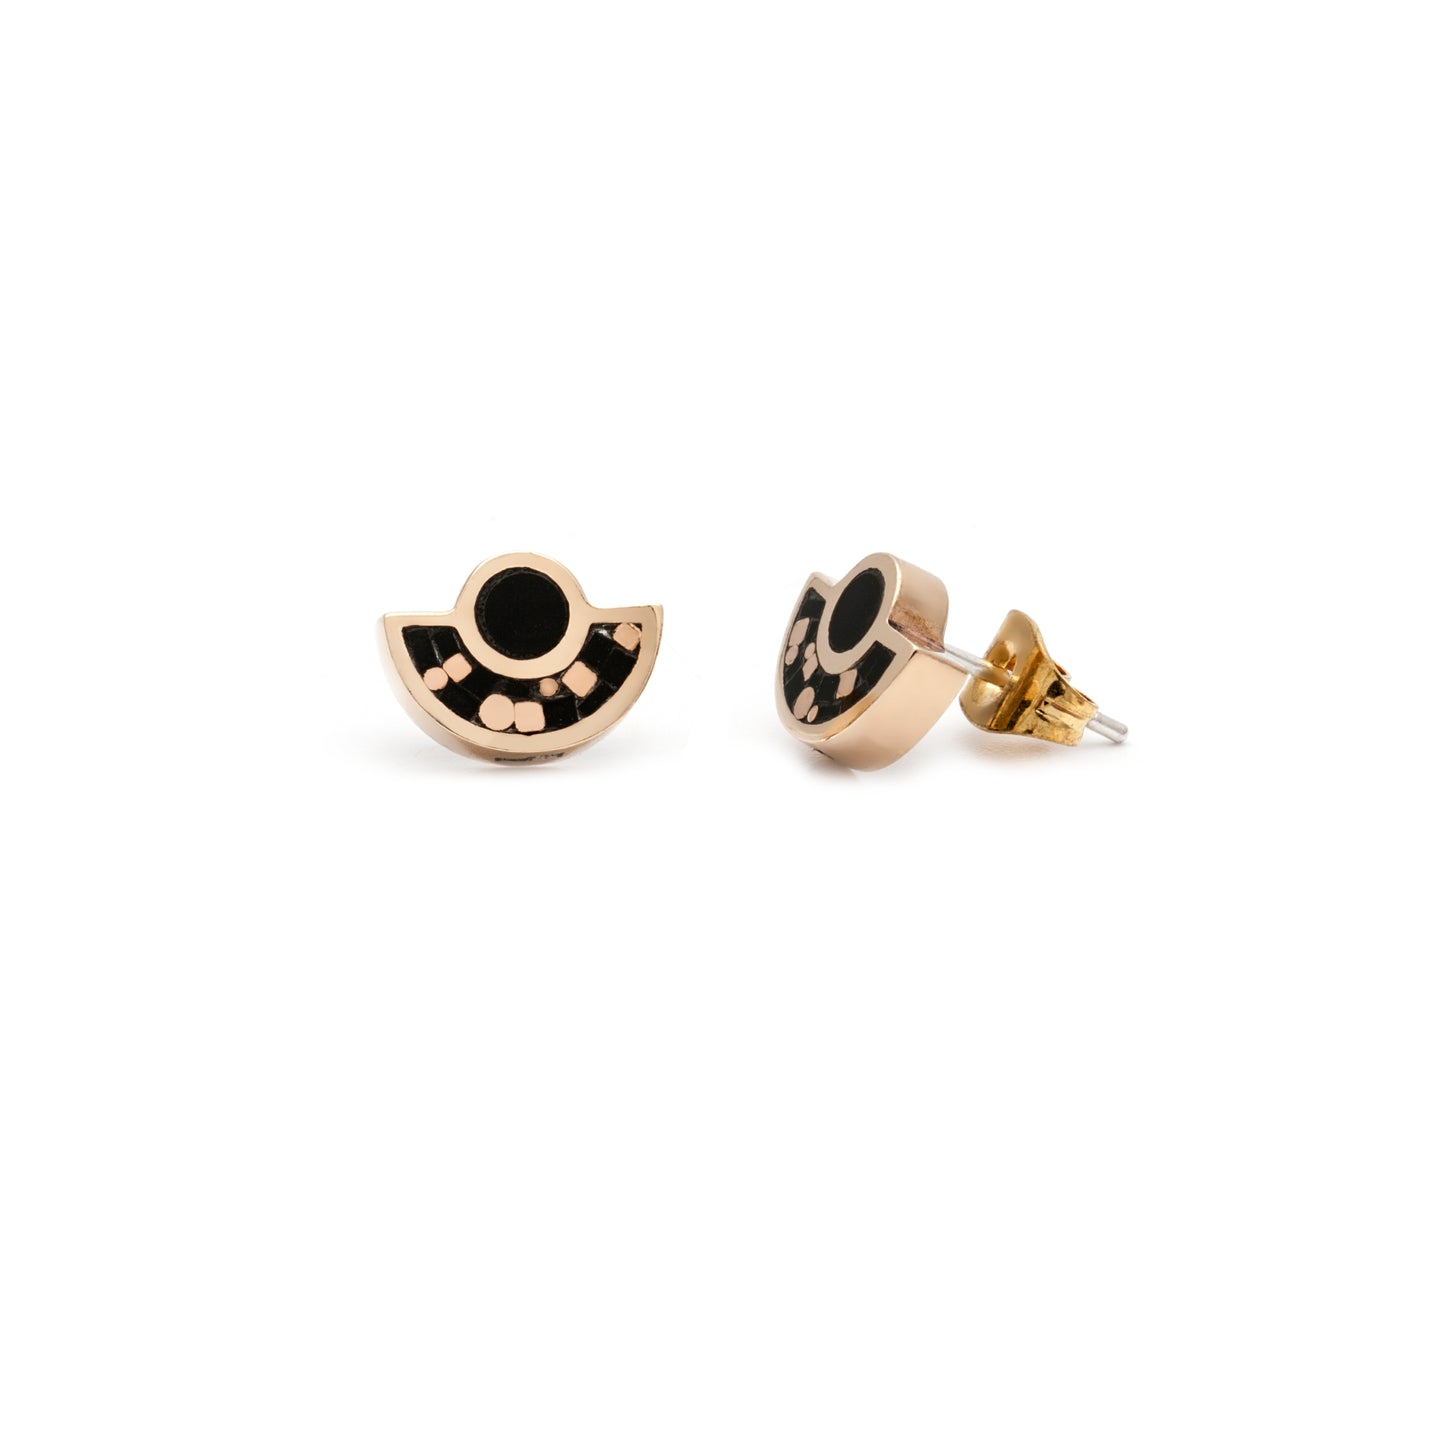 Gold stud earrings 14K yellow gold made by hand in Vancouver Canada geometric modern jewelry, black and gold inlay 